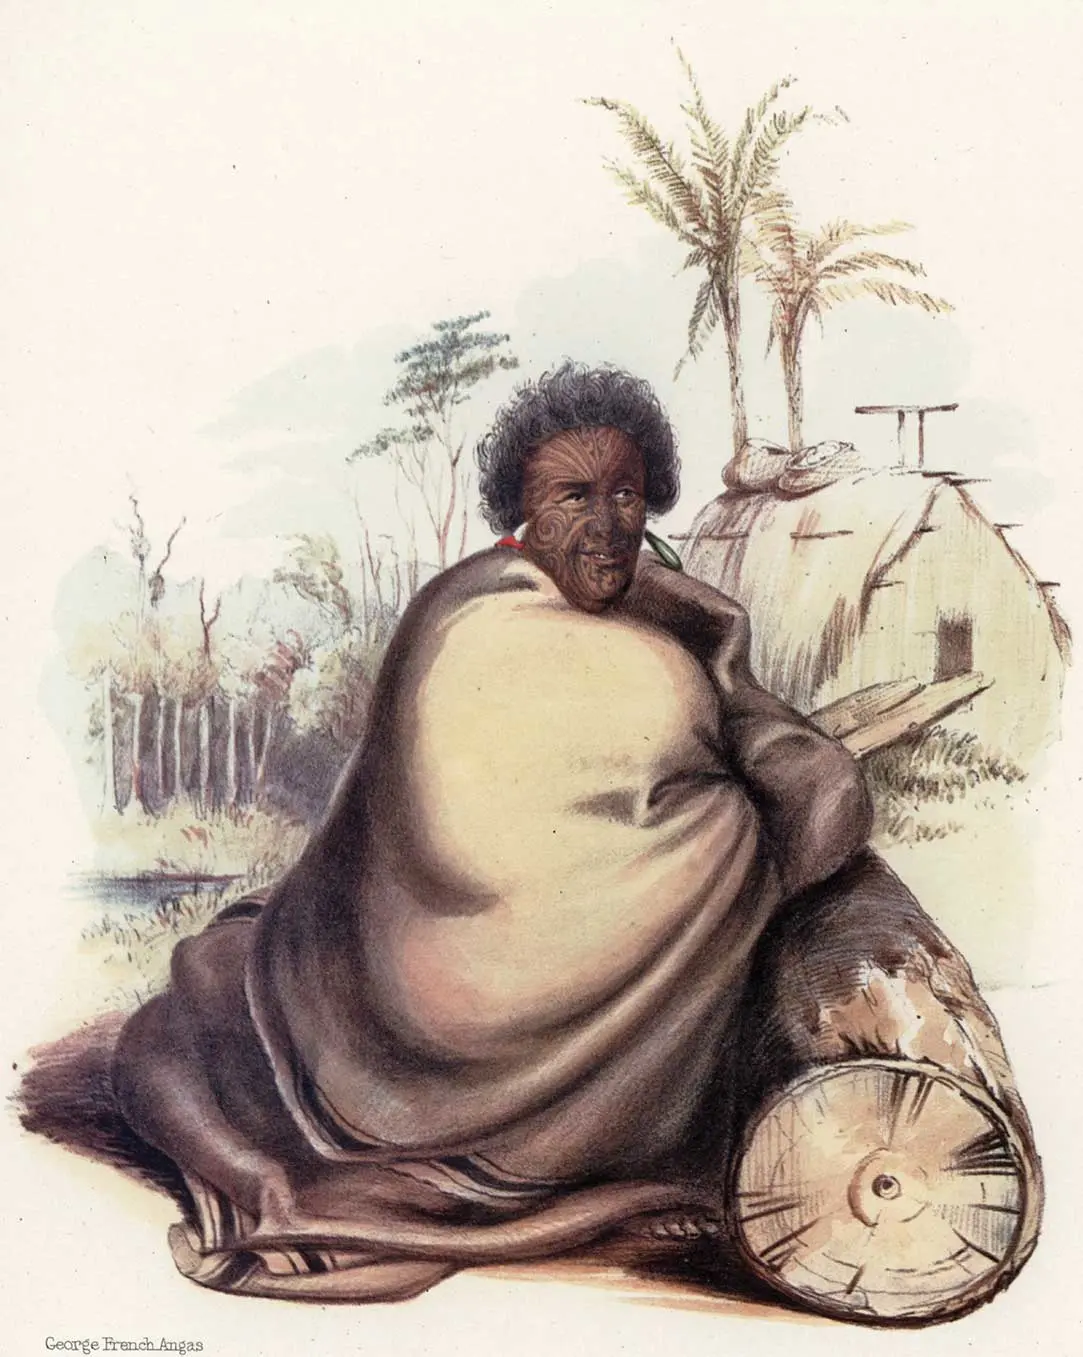 Portrait illustration of Pōtatau Te Wherowhero seated beside a log and wrapped in a cloak. A whare and trees are in the background.